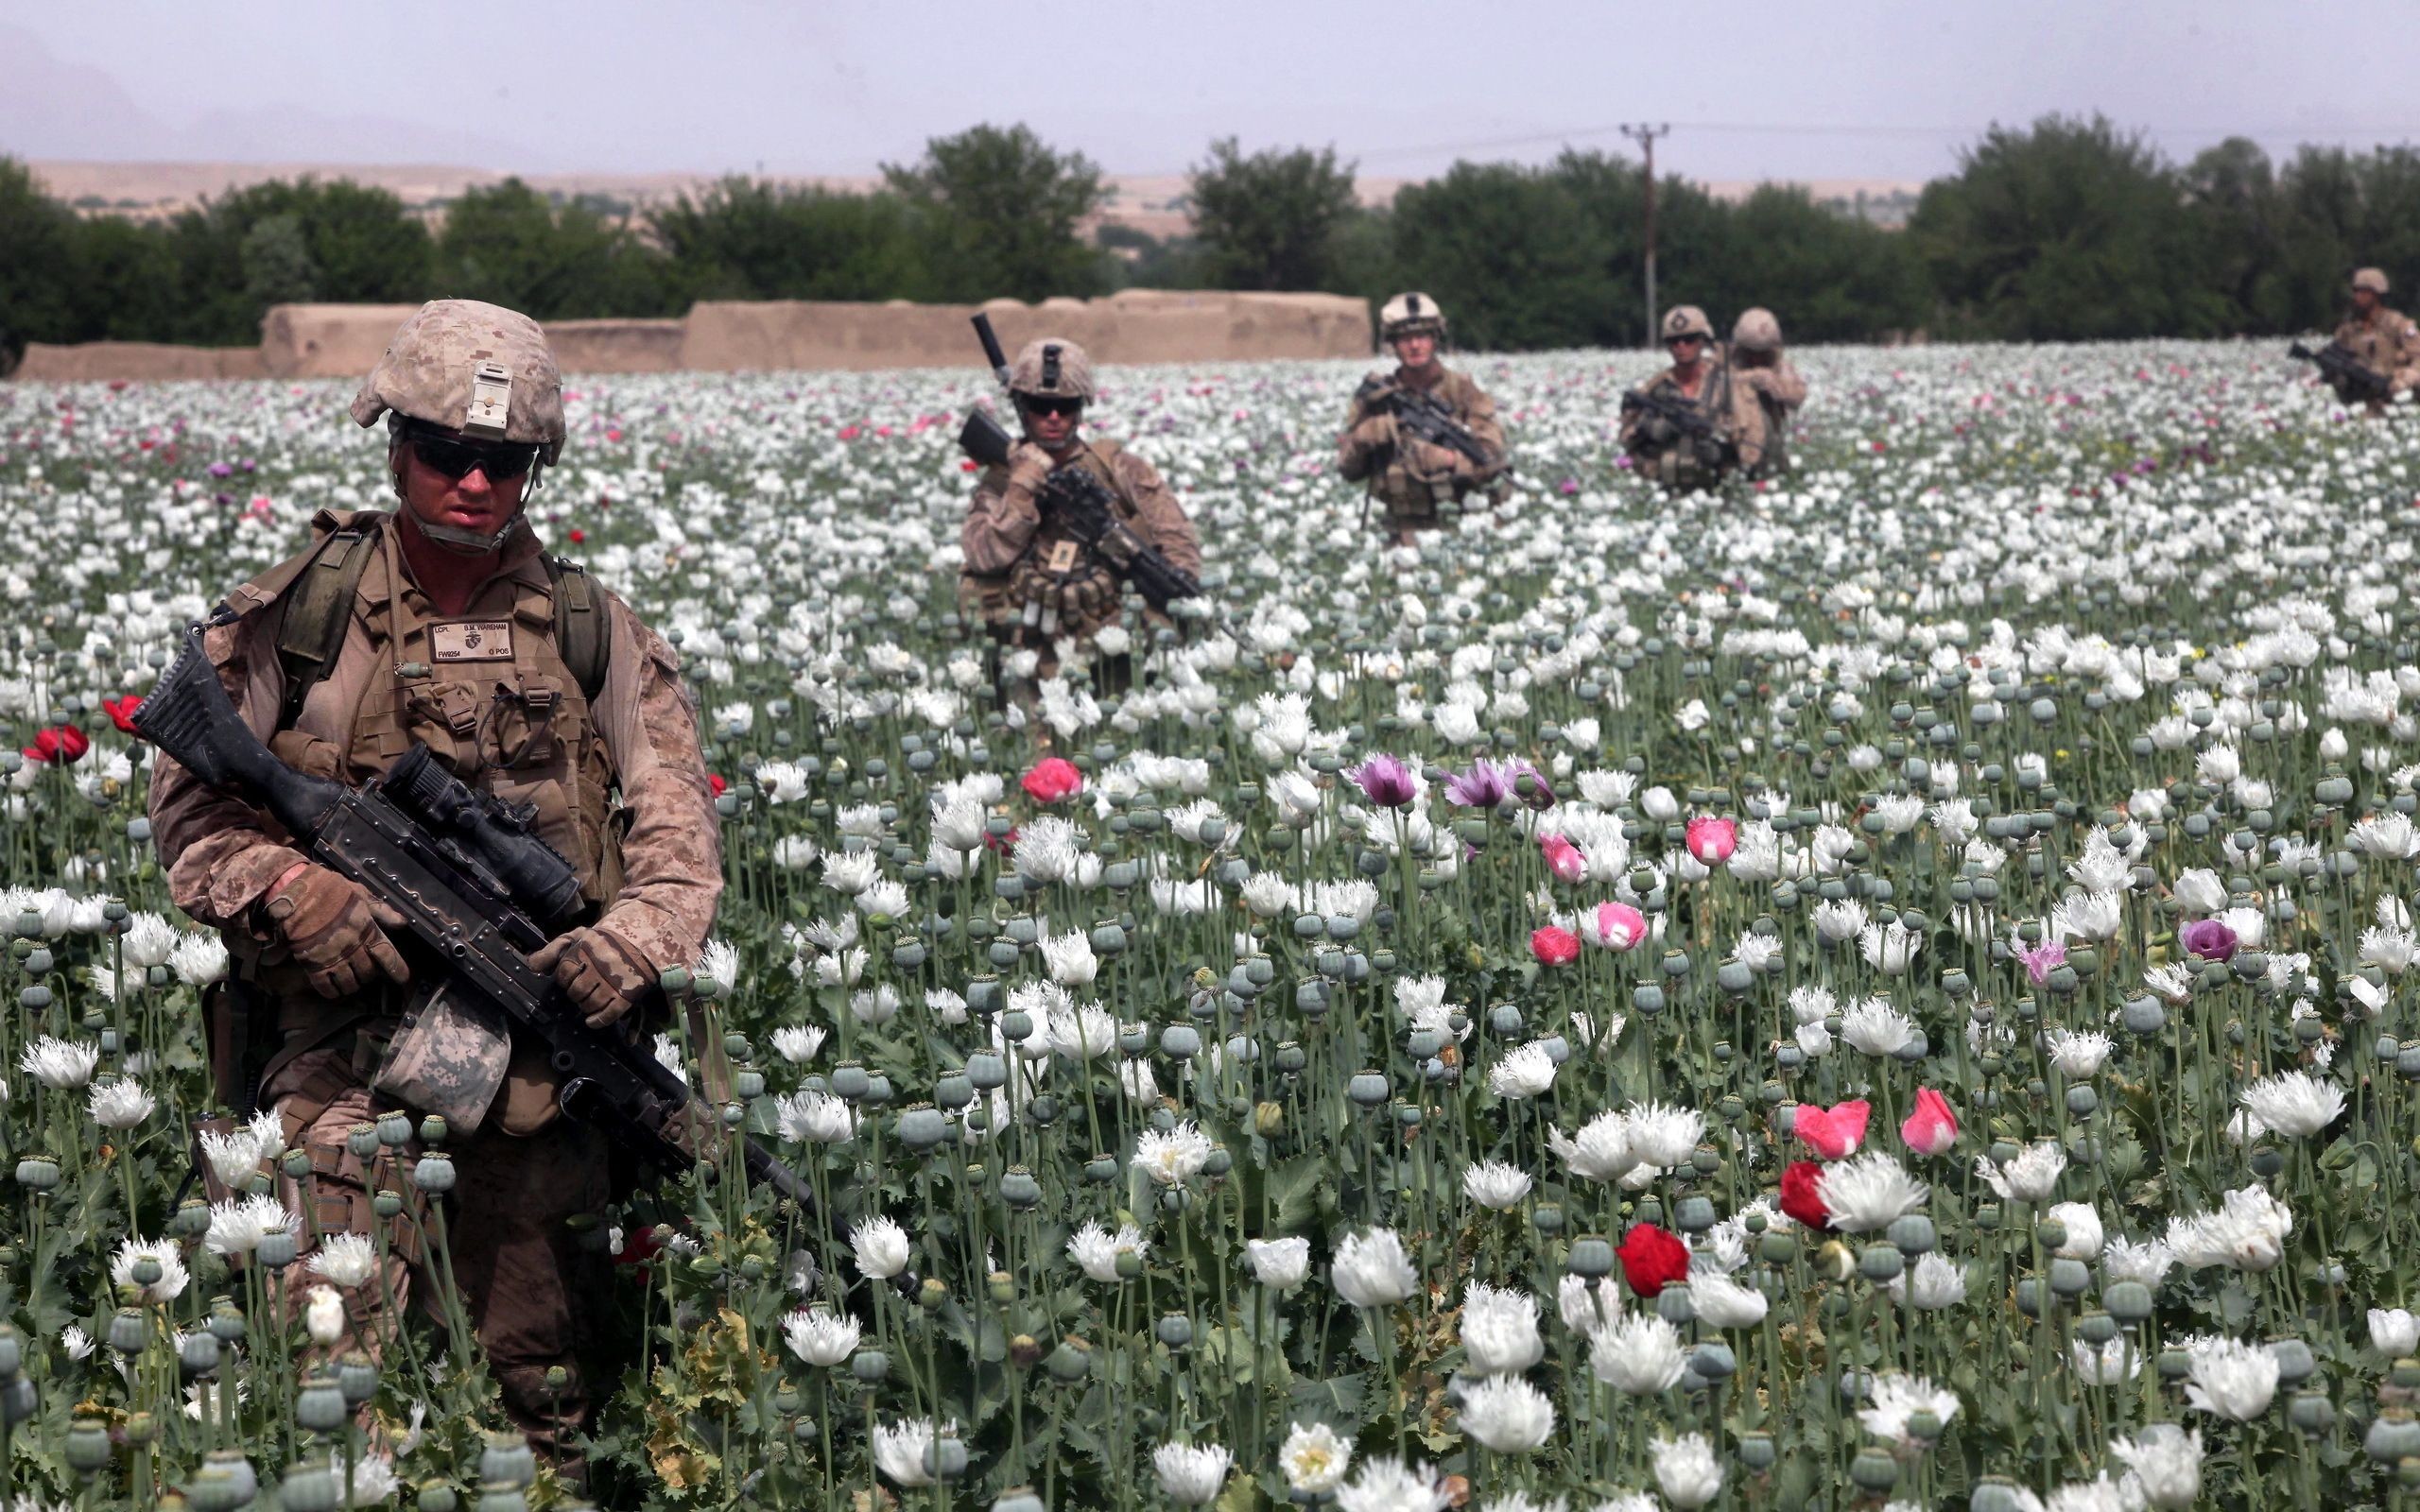 2560x1600 Soldiers in a poppy field wallpapers and images - wallpapers .